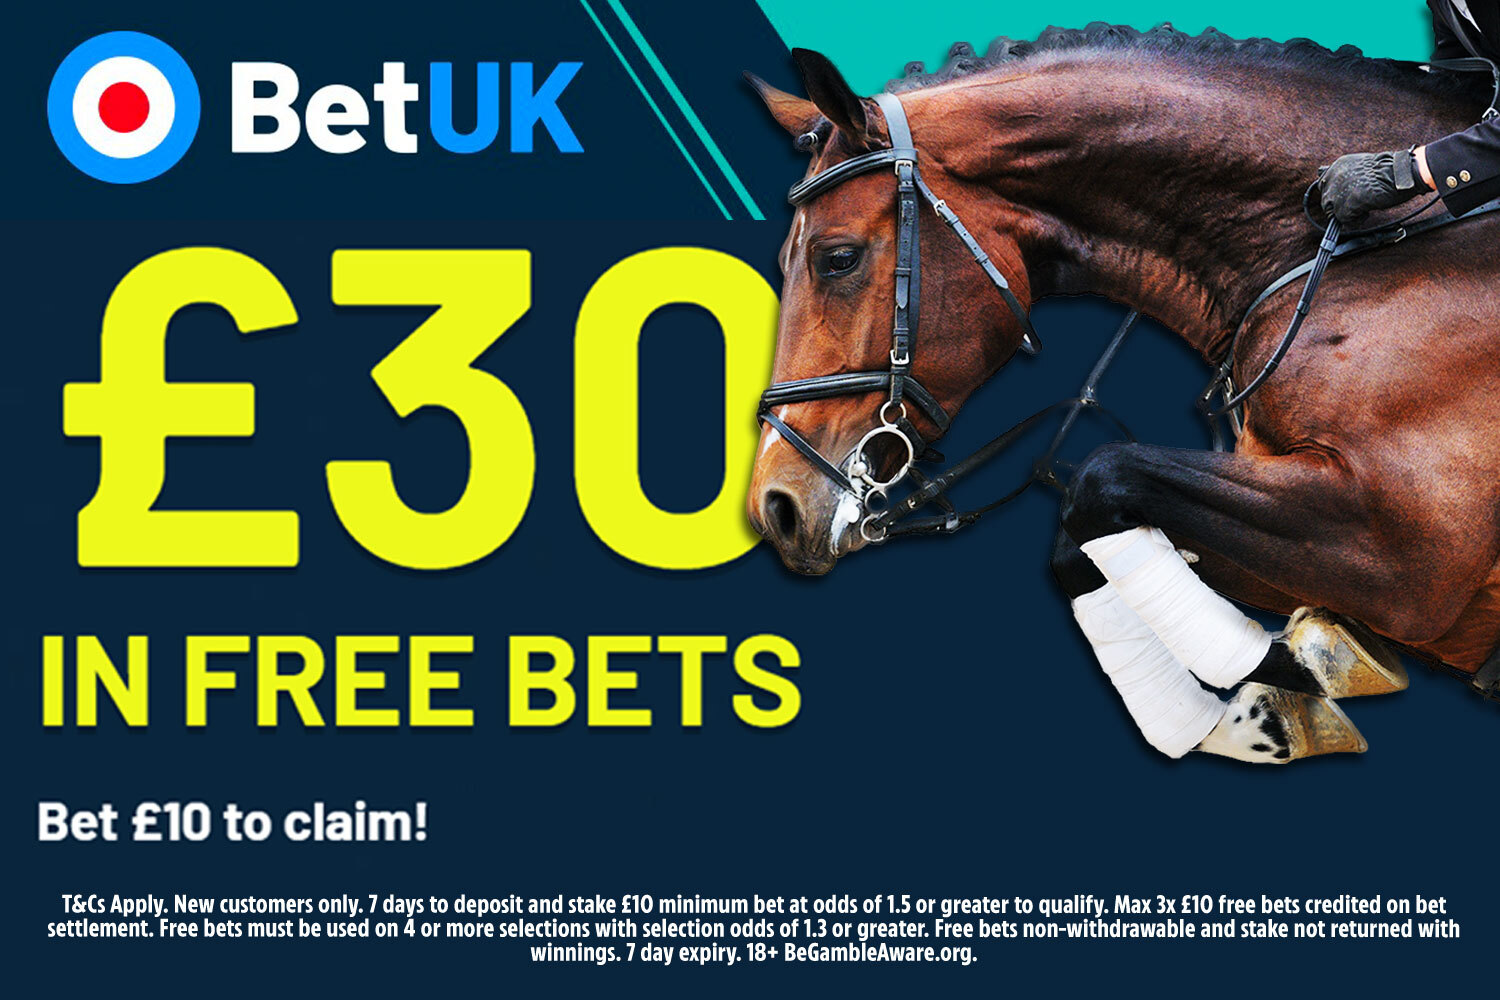 Horse racing betting offer of the day: Get £30 in free bets to use today with Bet UK